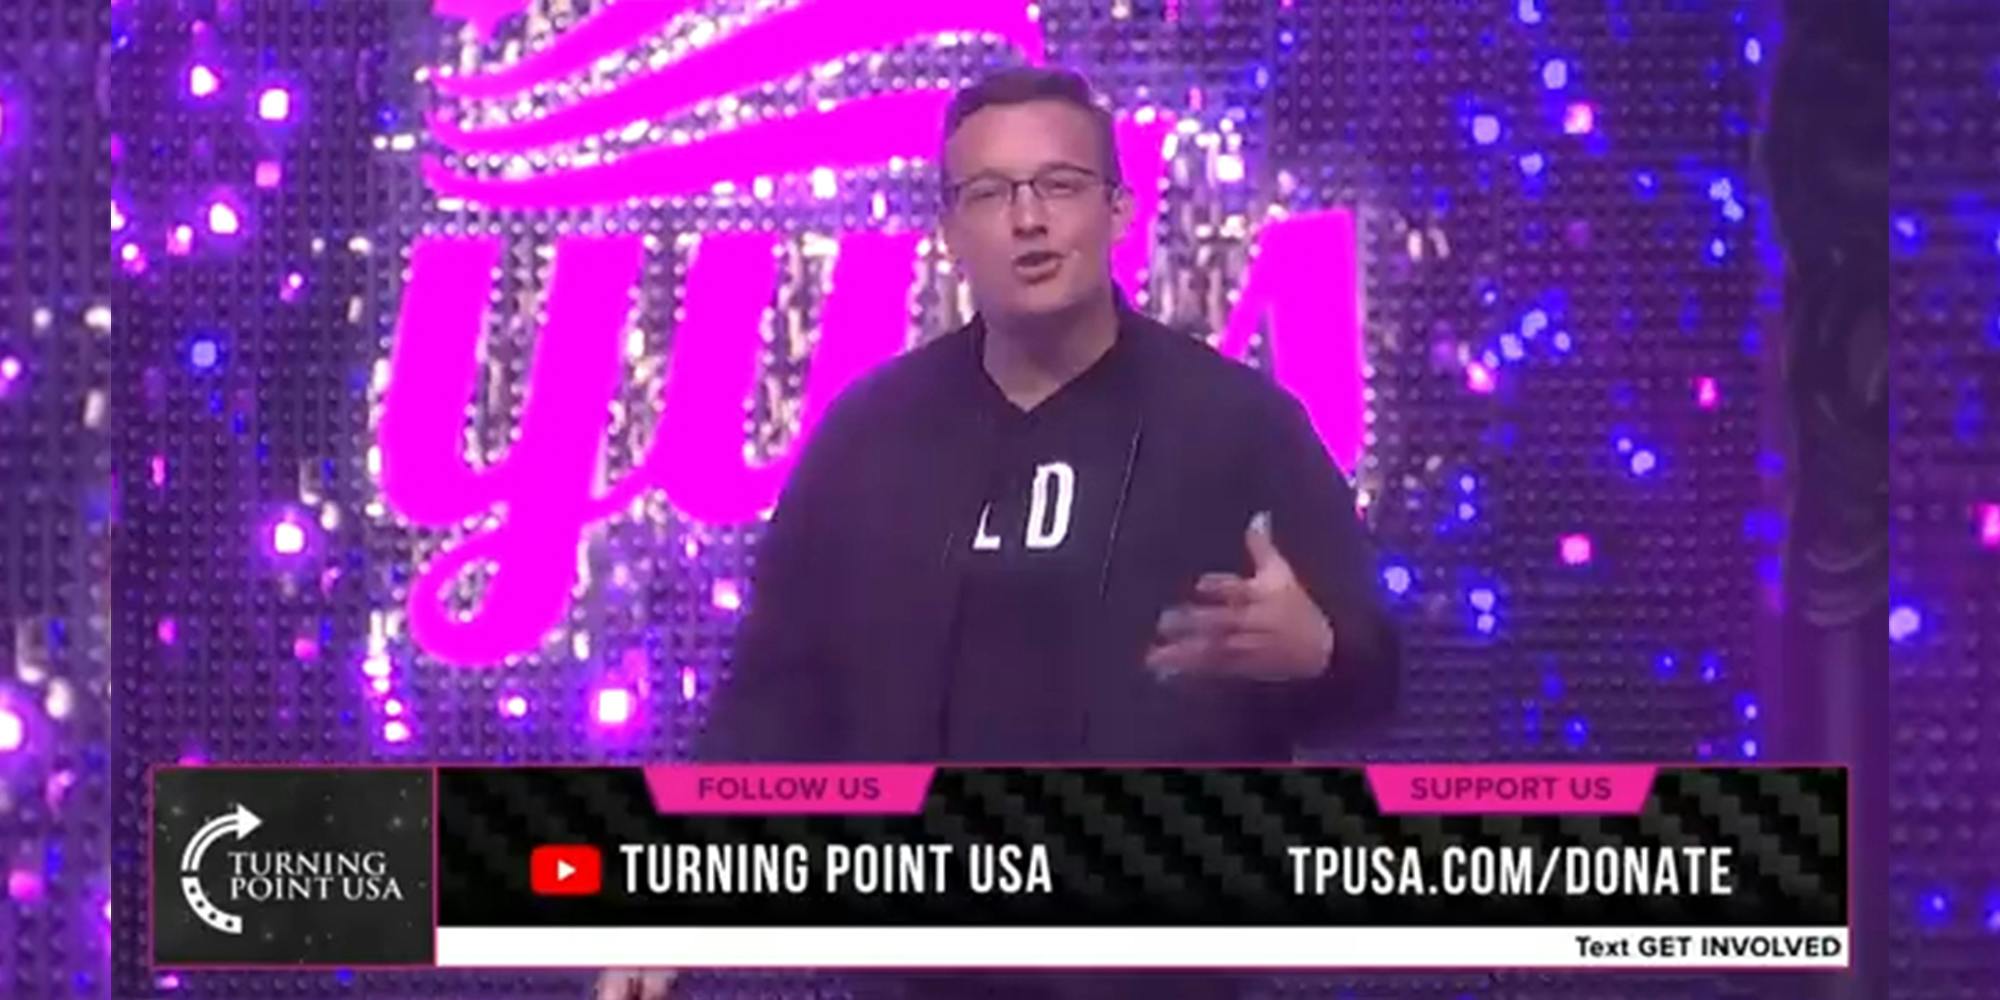 man on stage with "Turning Point USA" overlay